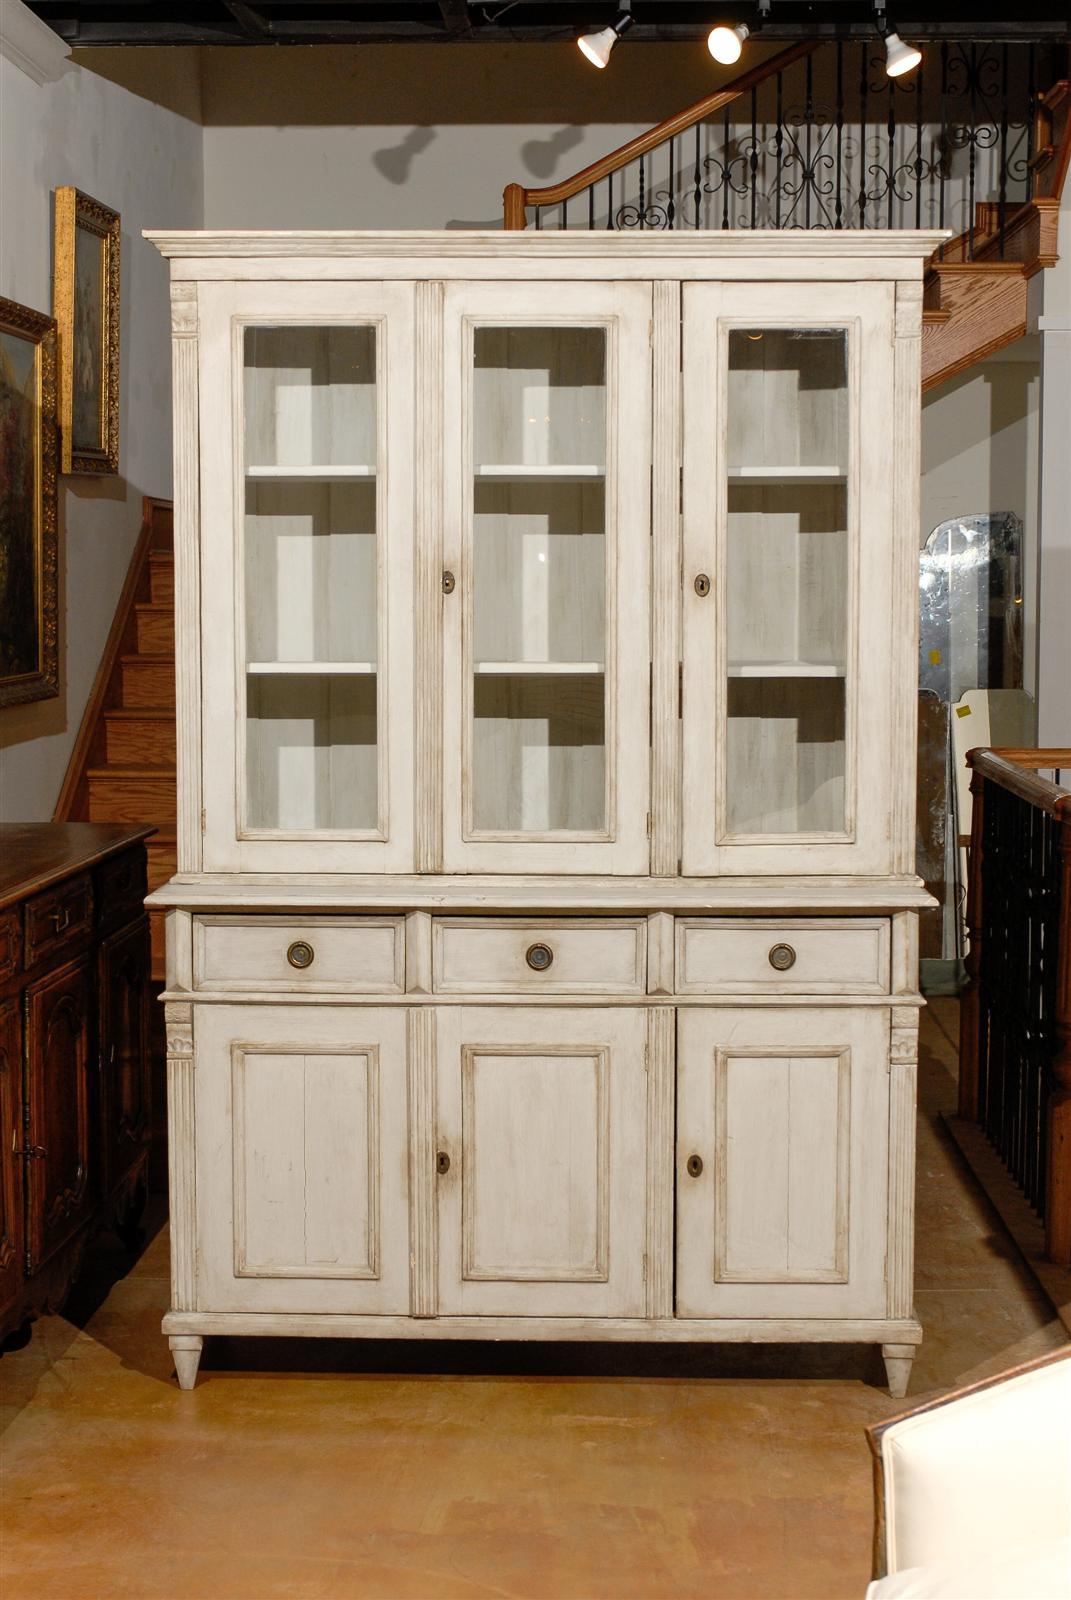 A Swedish Neoclassical style painted wood cupboard with glass doors in its upper cabinet and drawers over doors in the lower one, from the late 20th century. This Swedish cupboard was born in the later years of the 20th century and created in the